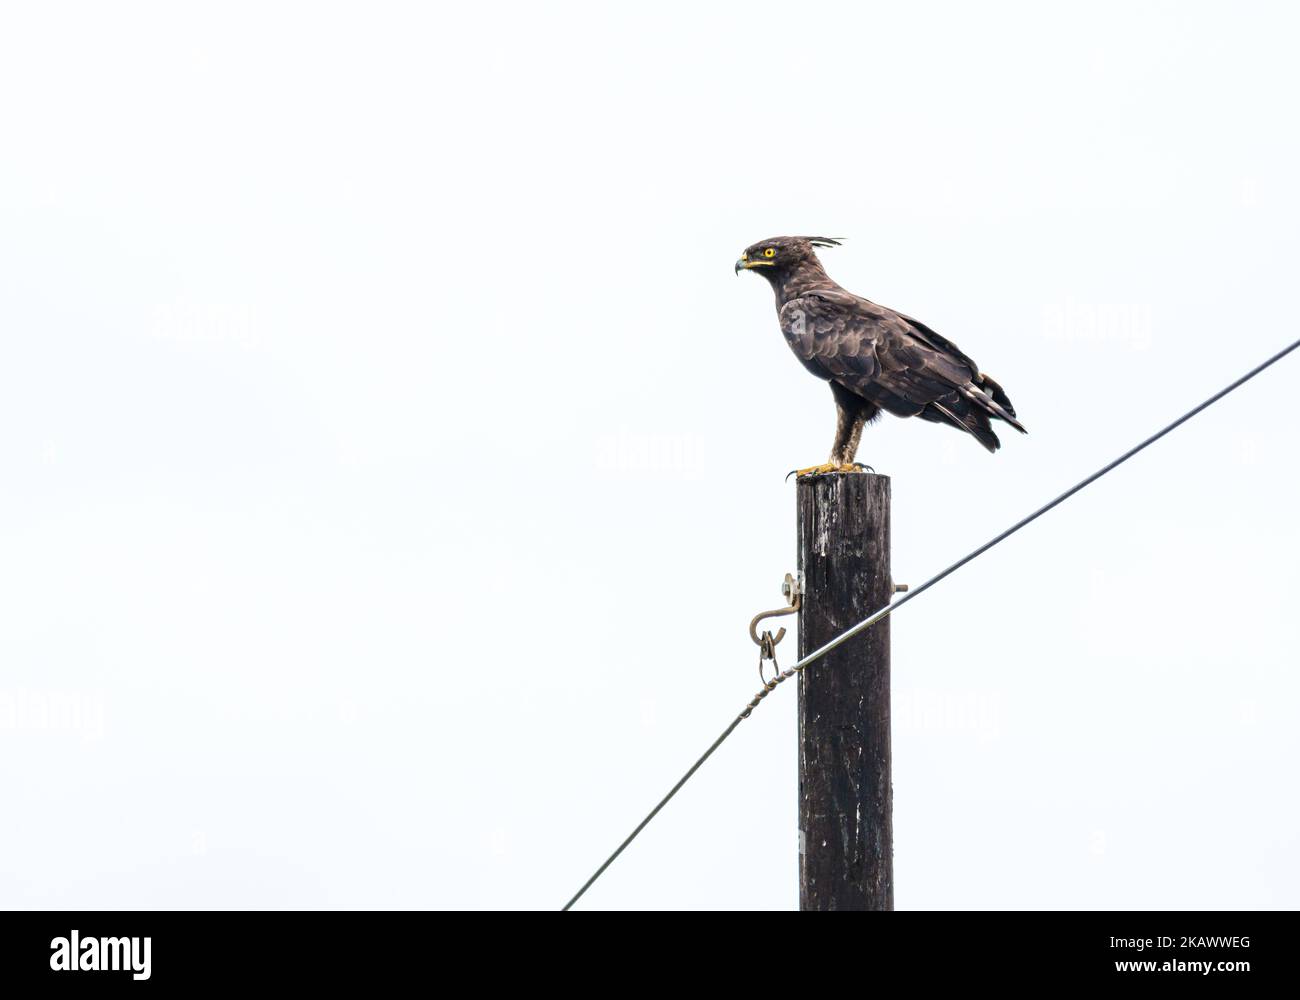 A beautiful Long-crested eagle perched on a wooden pole during the daytime in KwaZulu-Natal Stock Photo